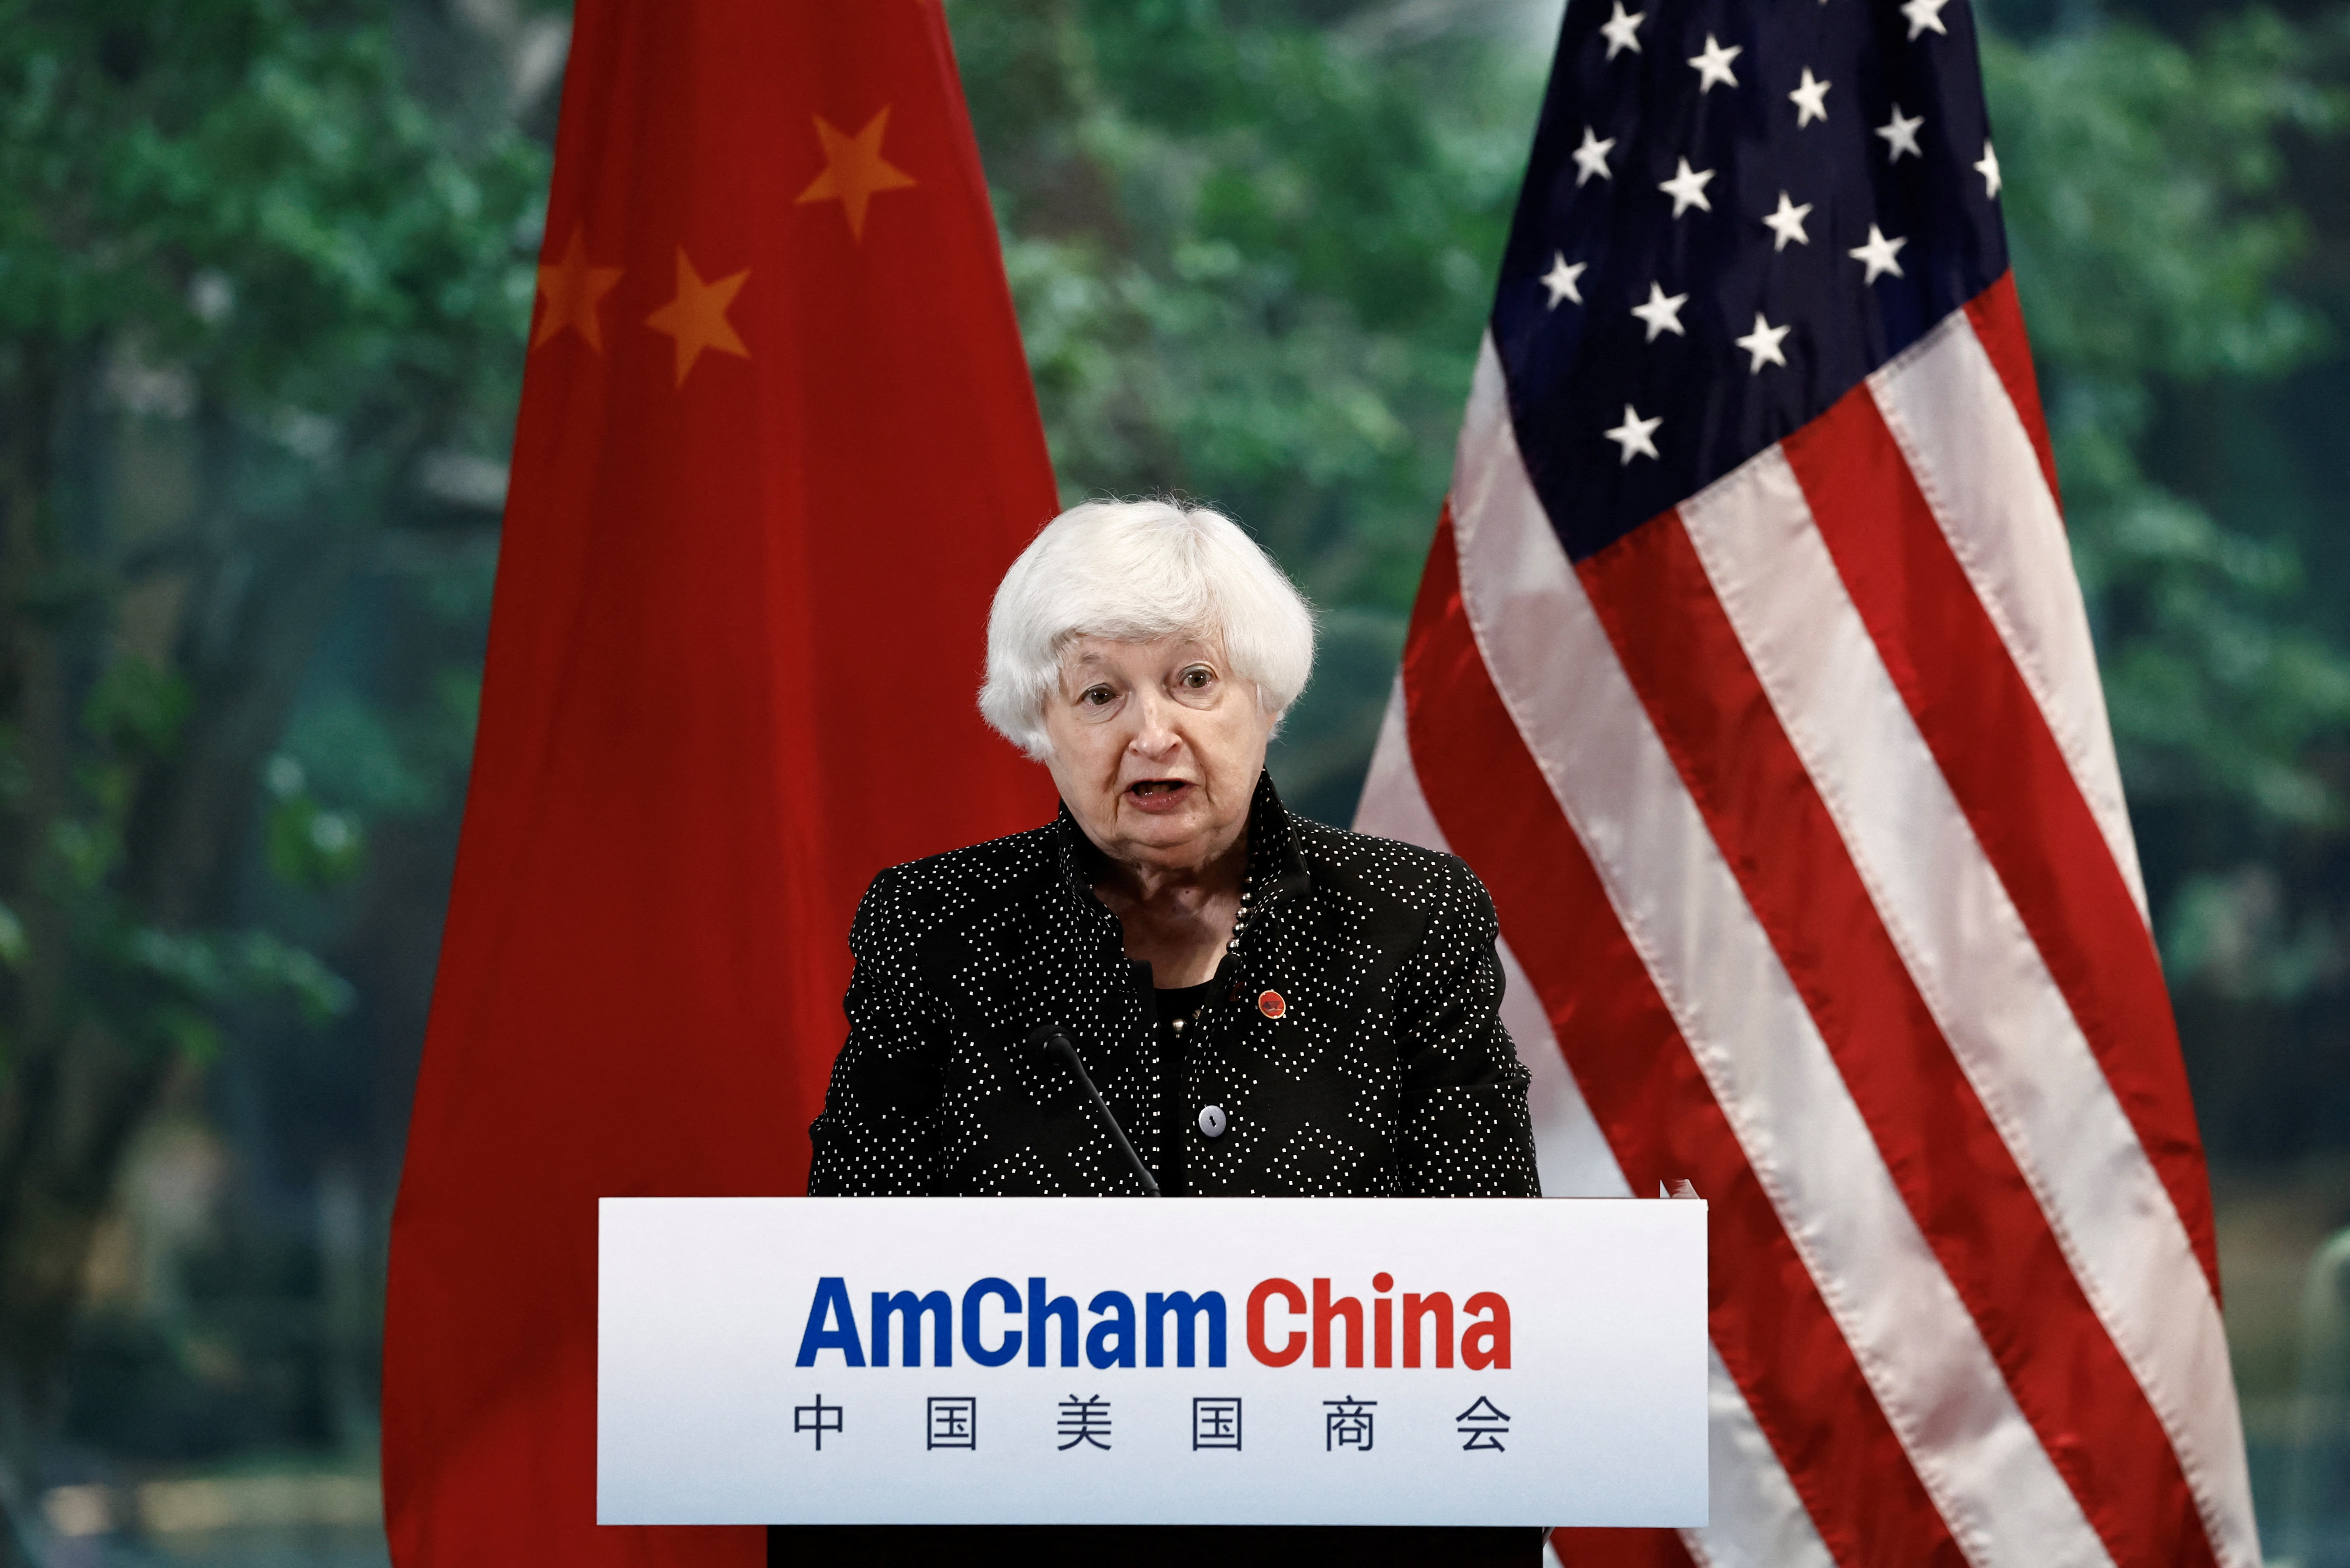 U.S. Treasury Secretary Janet Yellen speaks during an event by the American Chamber of Commerce in China (AmCham China) in Guangzhou